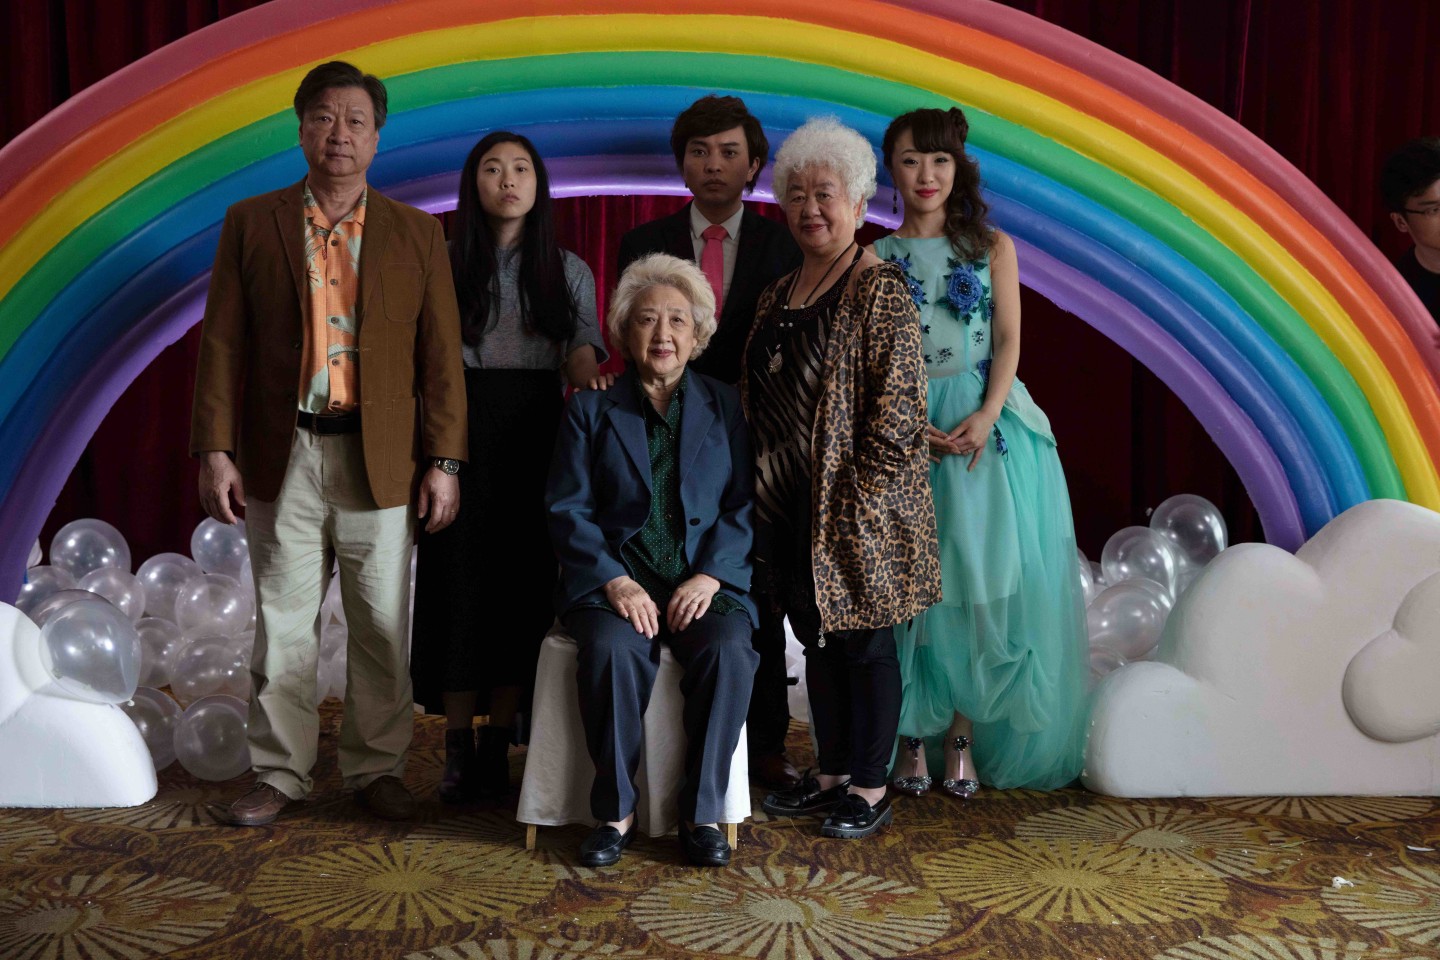 <i>The Farewell</i> director Lulu Wang on being caught between worlds